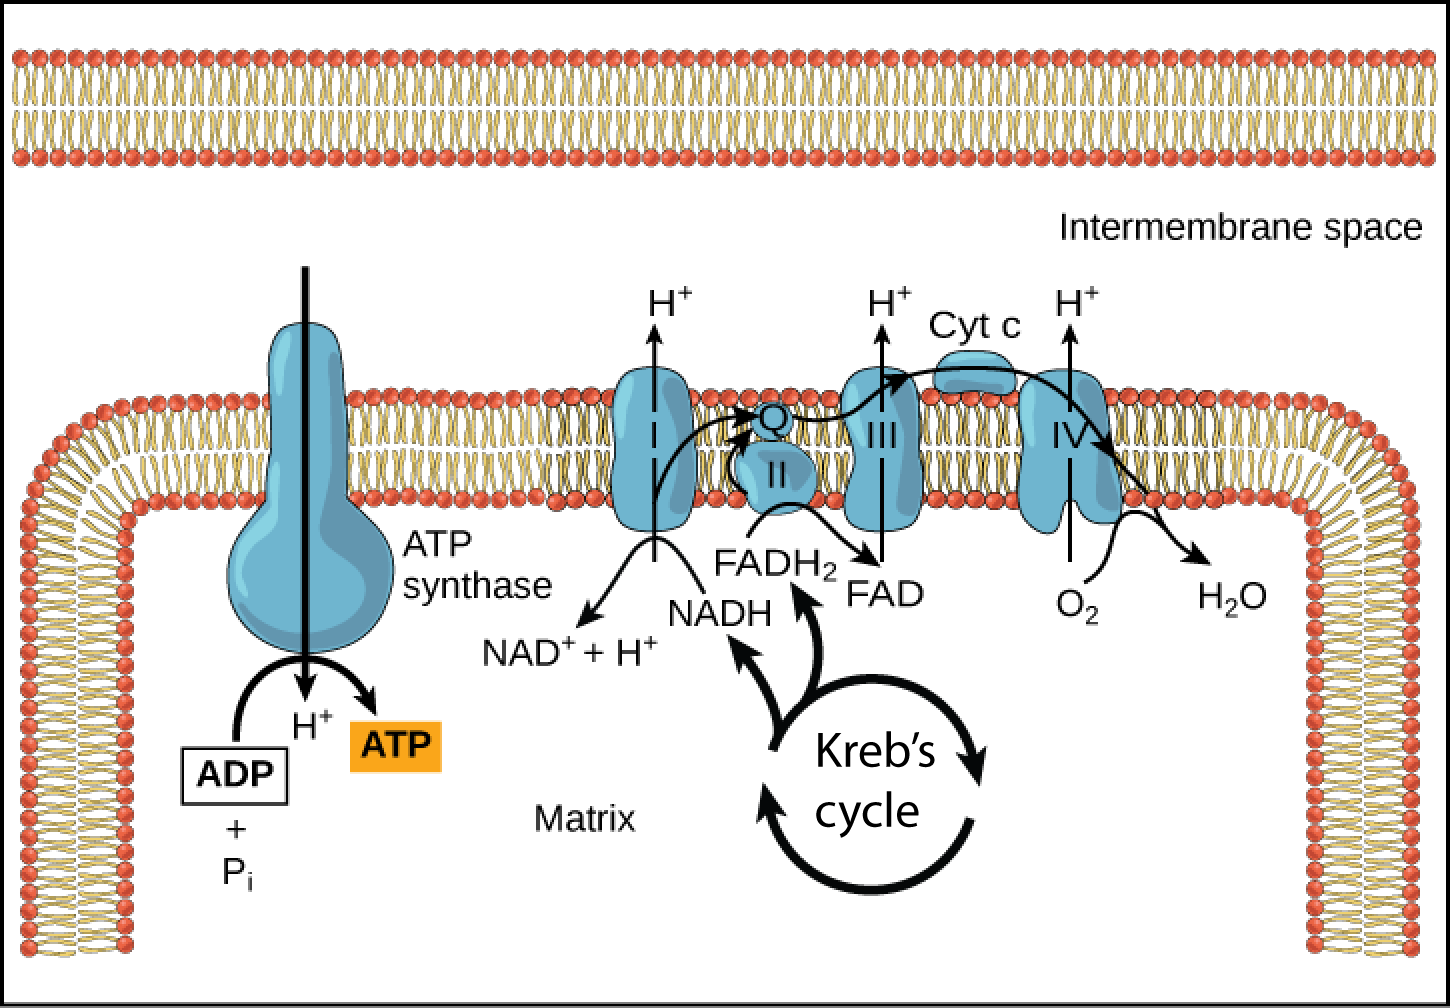 This illustration shows the electron transport chain, the ATP synthase enzyme embedded in the inner mitochondrial membrane, and the citric acid cycle occurring in the mitochondrial matrix. The citric acid cycle feeds NADH and FADH_{2} to the electron transport chain. The electron transport chain oxidizes these substrates and, in the process, pumps protons into the intermembrane space. ATP synthase allows protons to leak back into the matrix and synthesizes ATP.